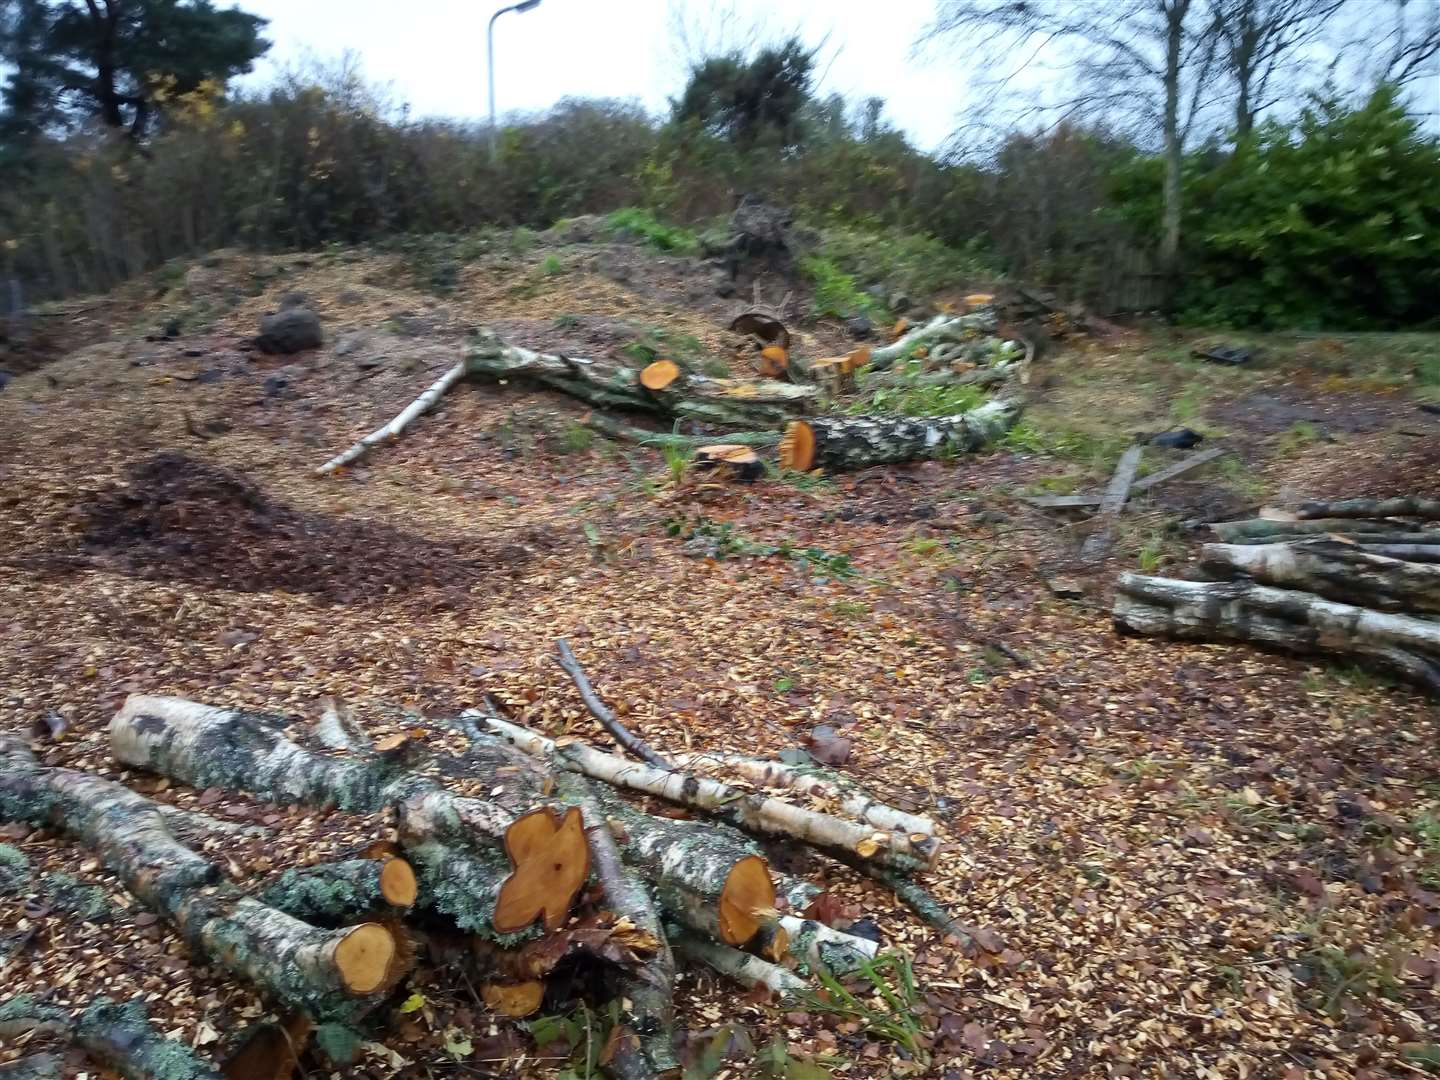 Five trees in total were felled at the cemetery.